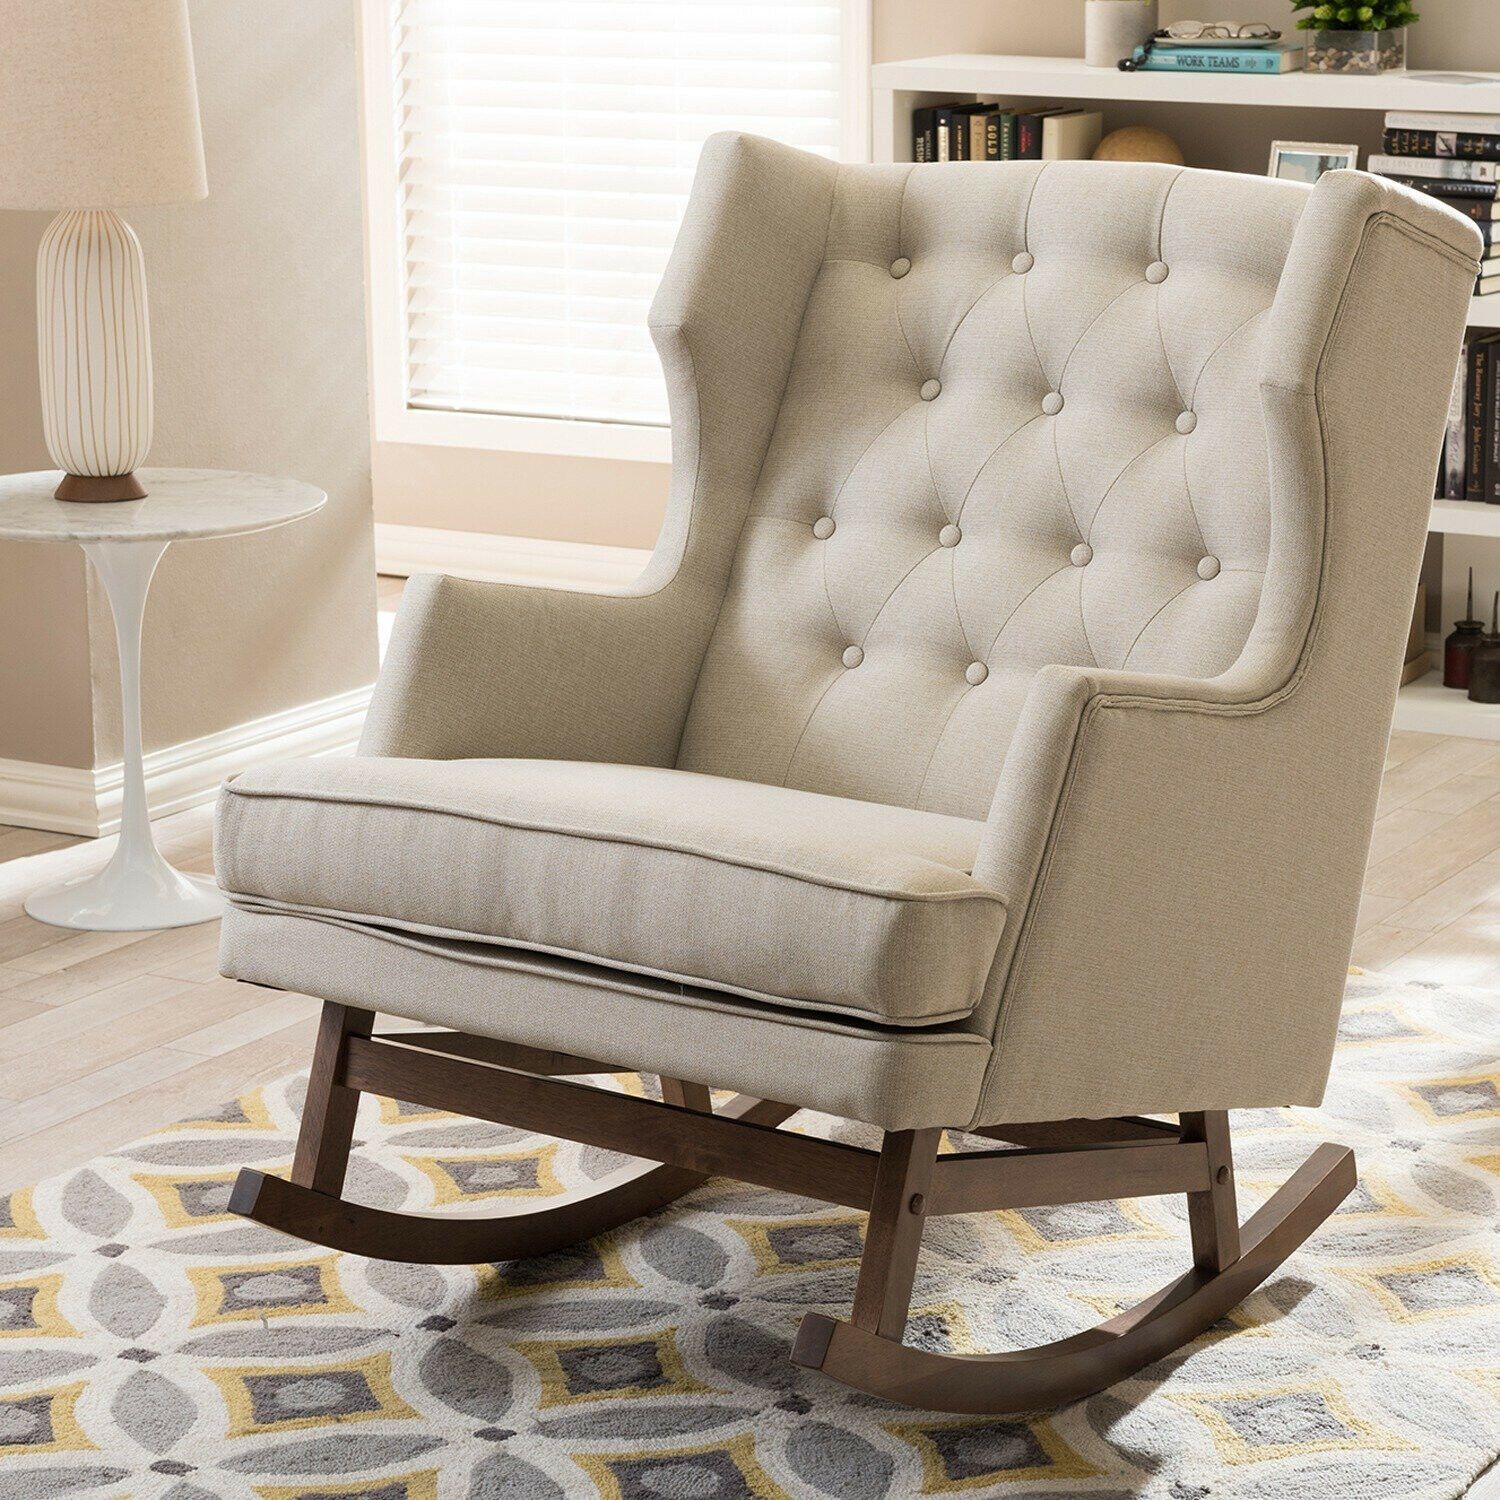 Higgins Contemporary Light Beige Fabric Rocking Chair Home Lounge Furniture Intended For Padded Rocking Chairs (Photo 1 of 20)